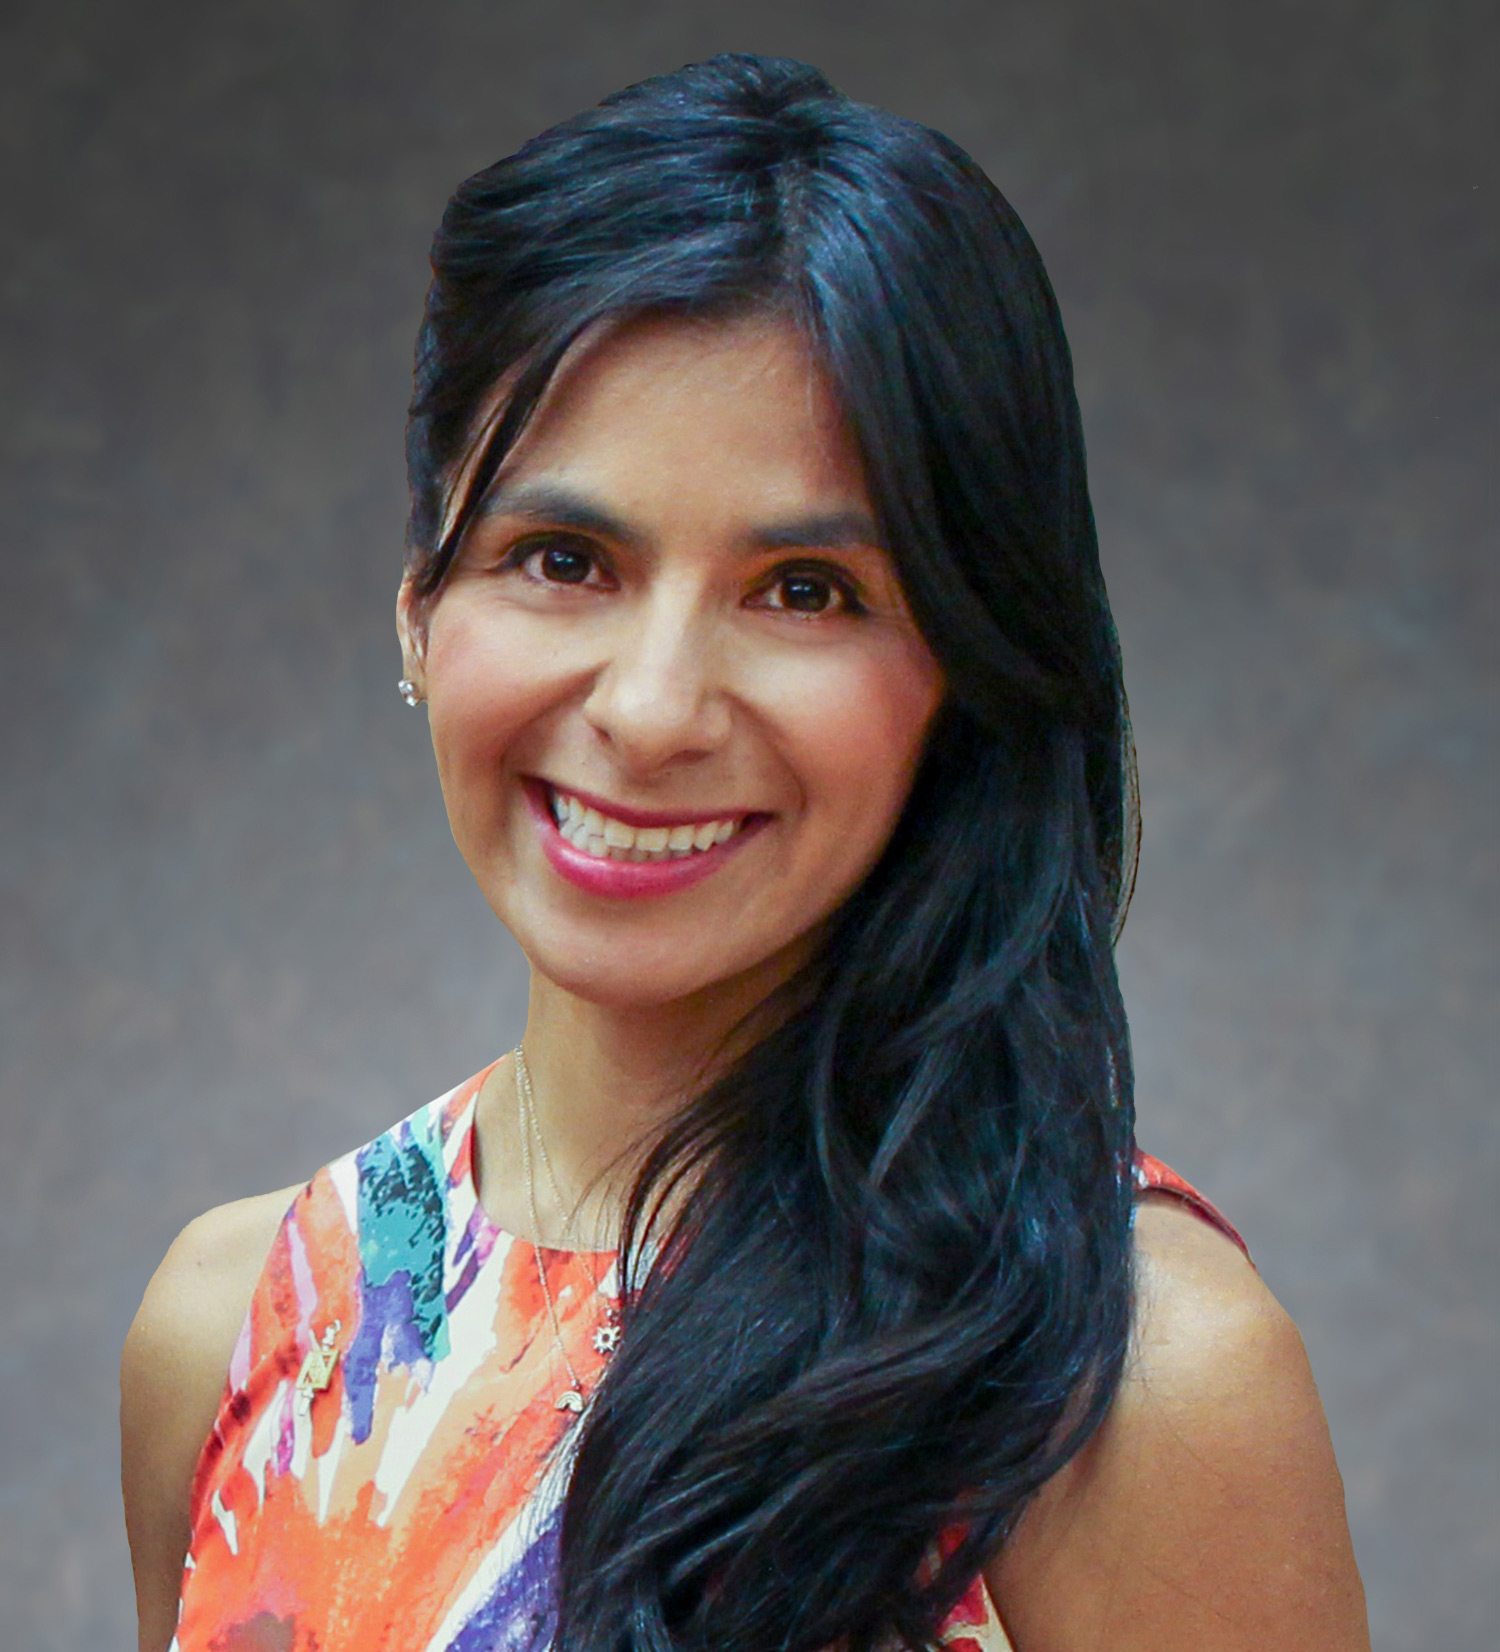 Hall Family Foundation Names Mayra Aguirre as its New President